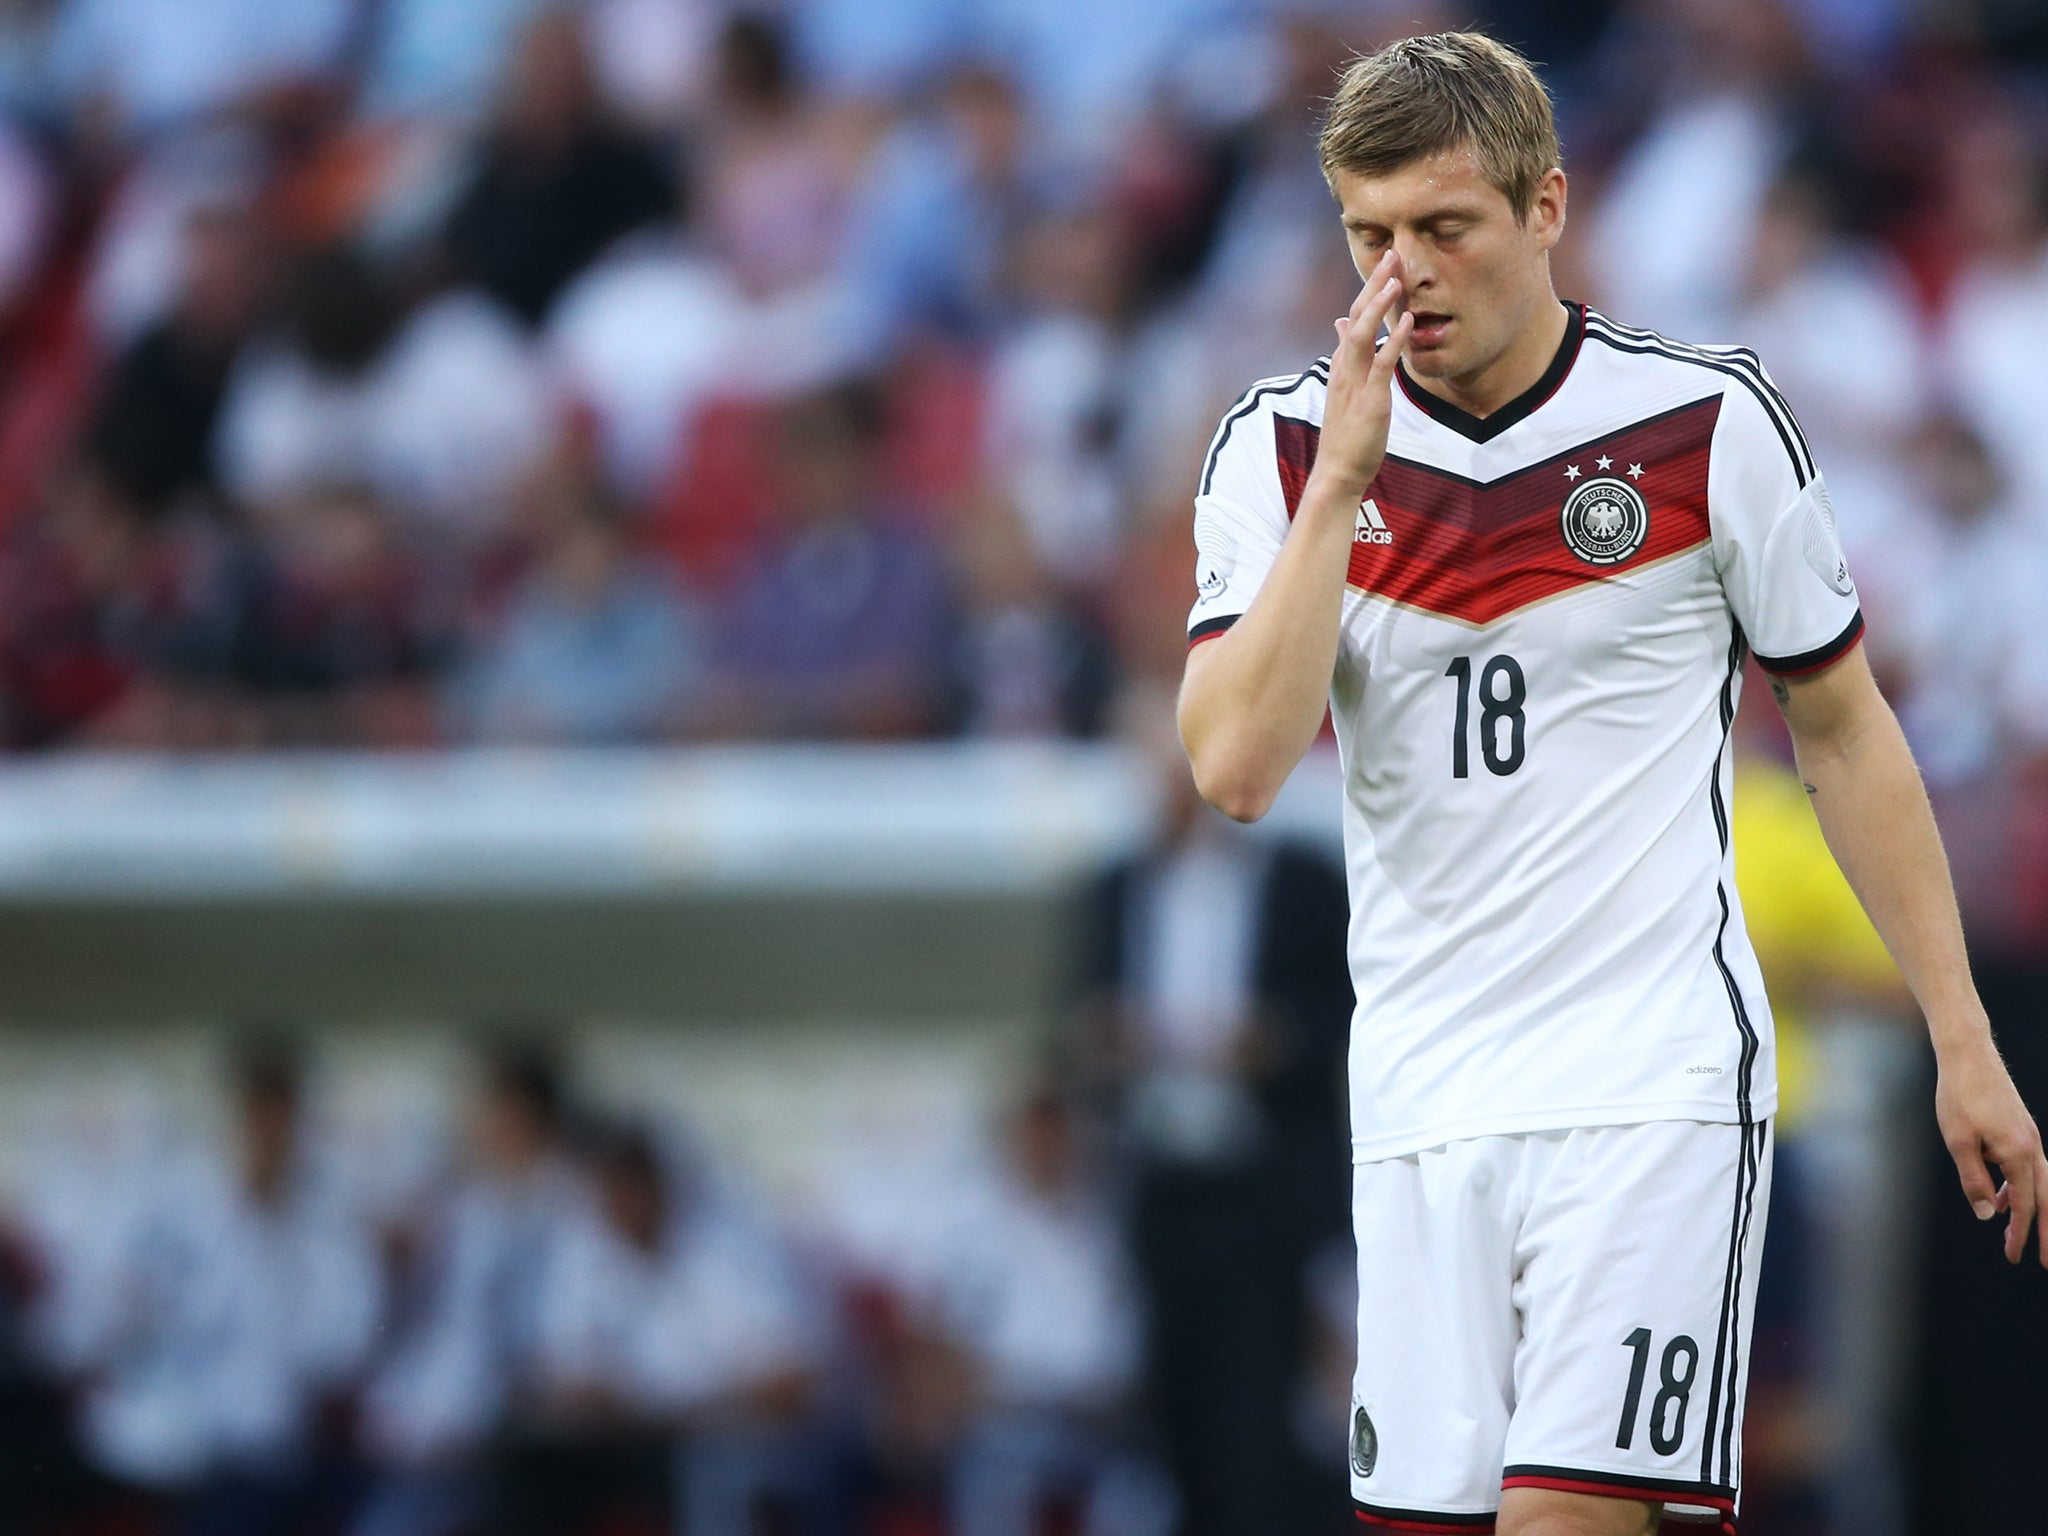 Toni Kroos is expected to make a move to Real Madrid